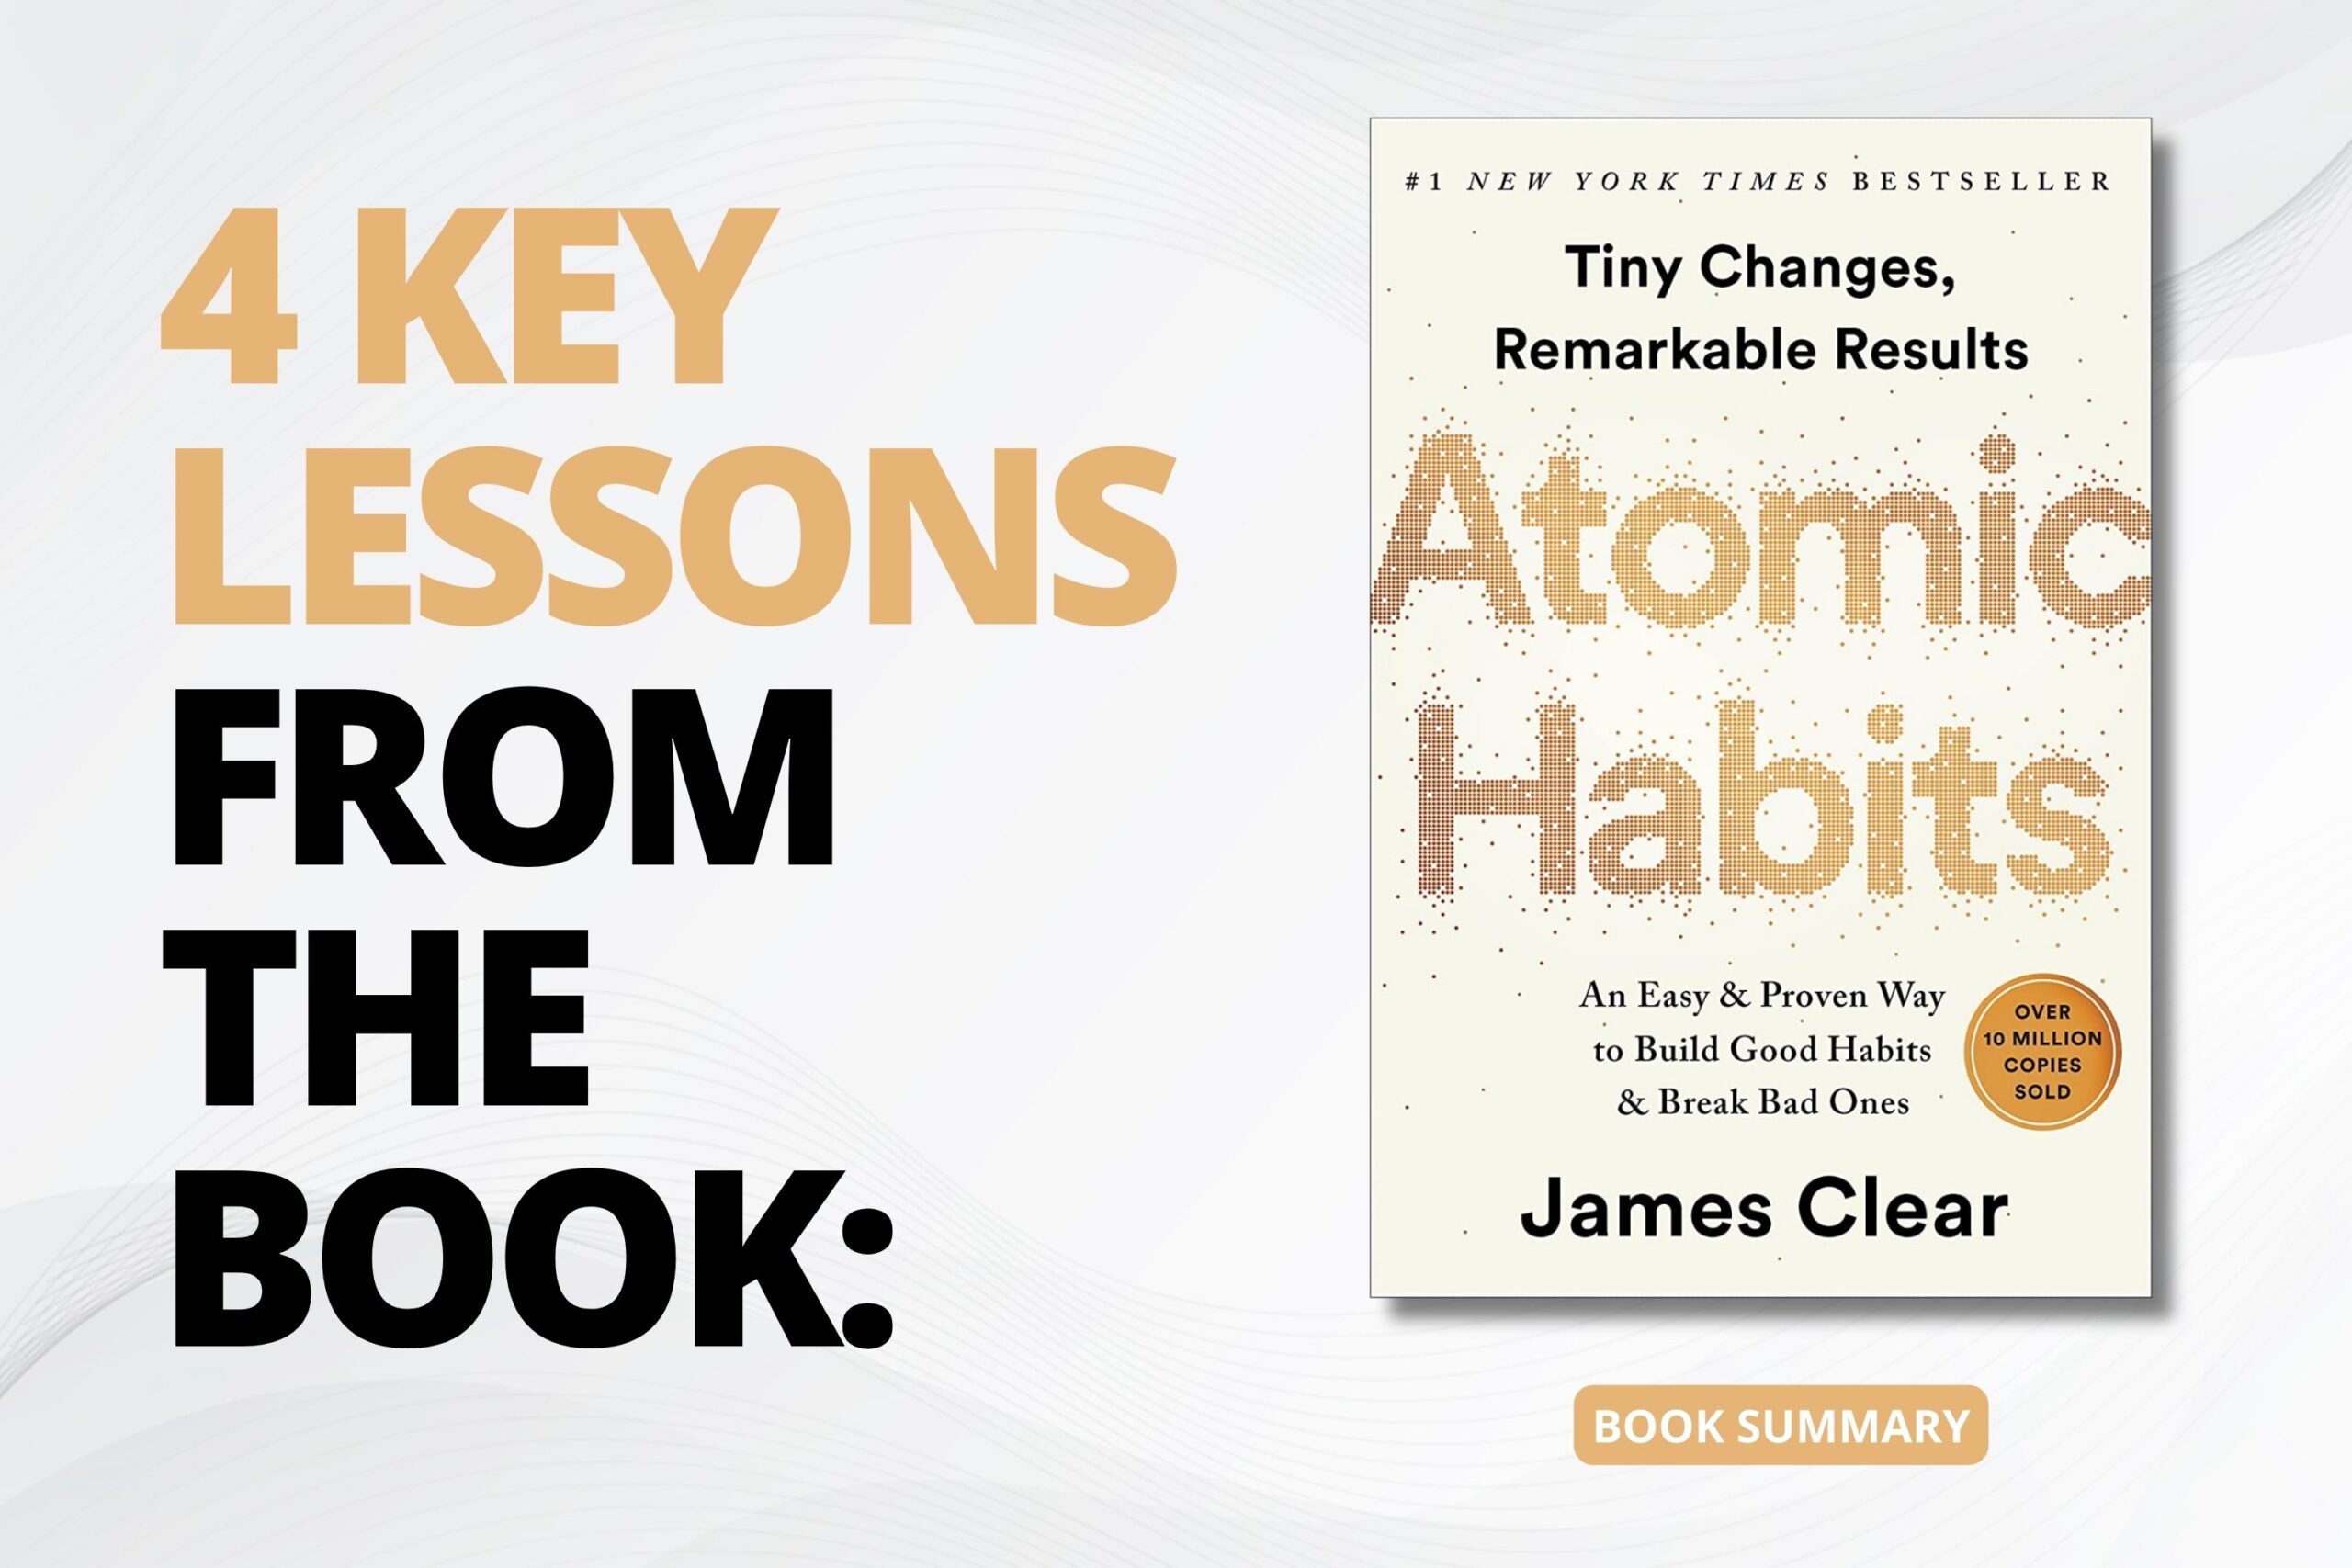 Atomic Habits Book Summary (5 LESSONS) 